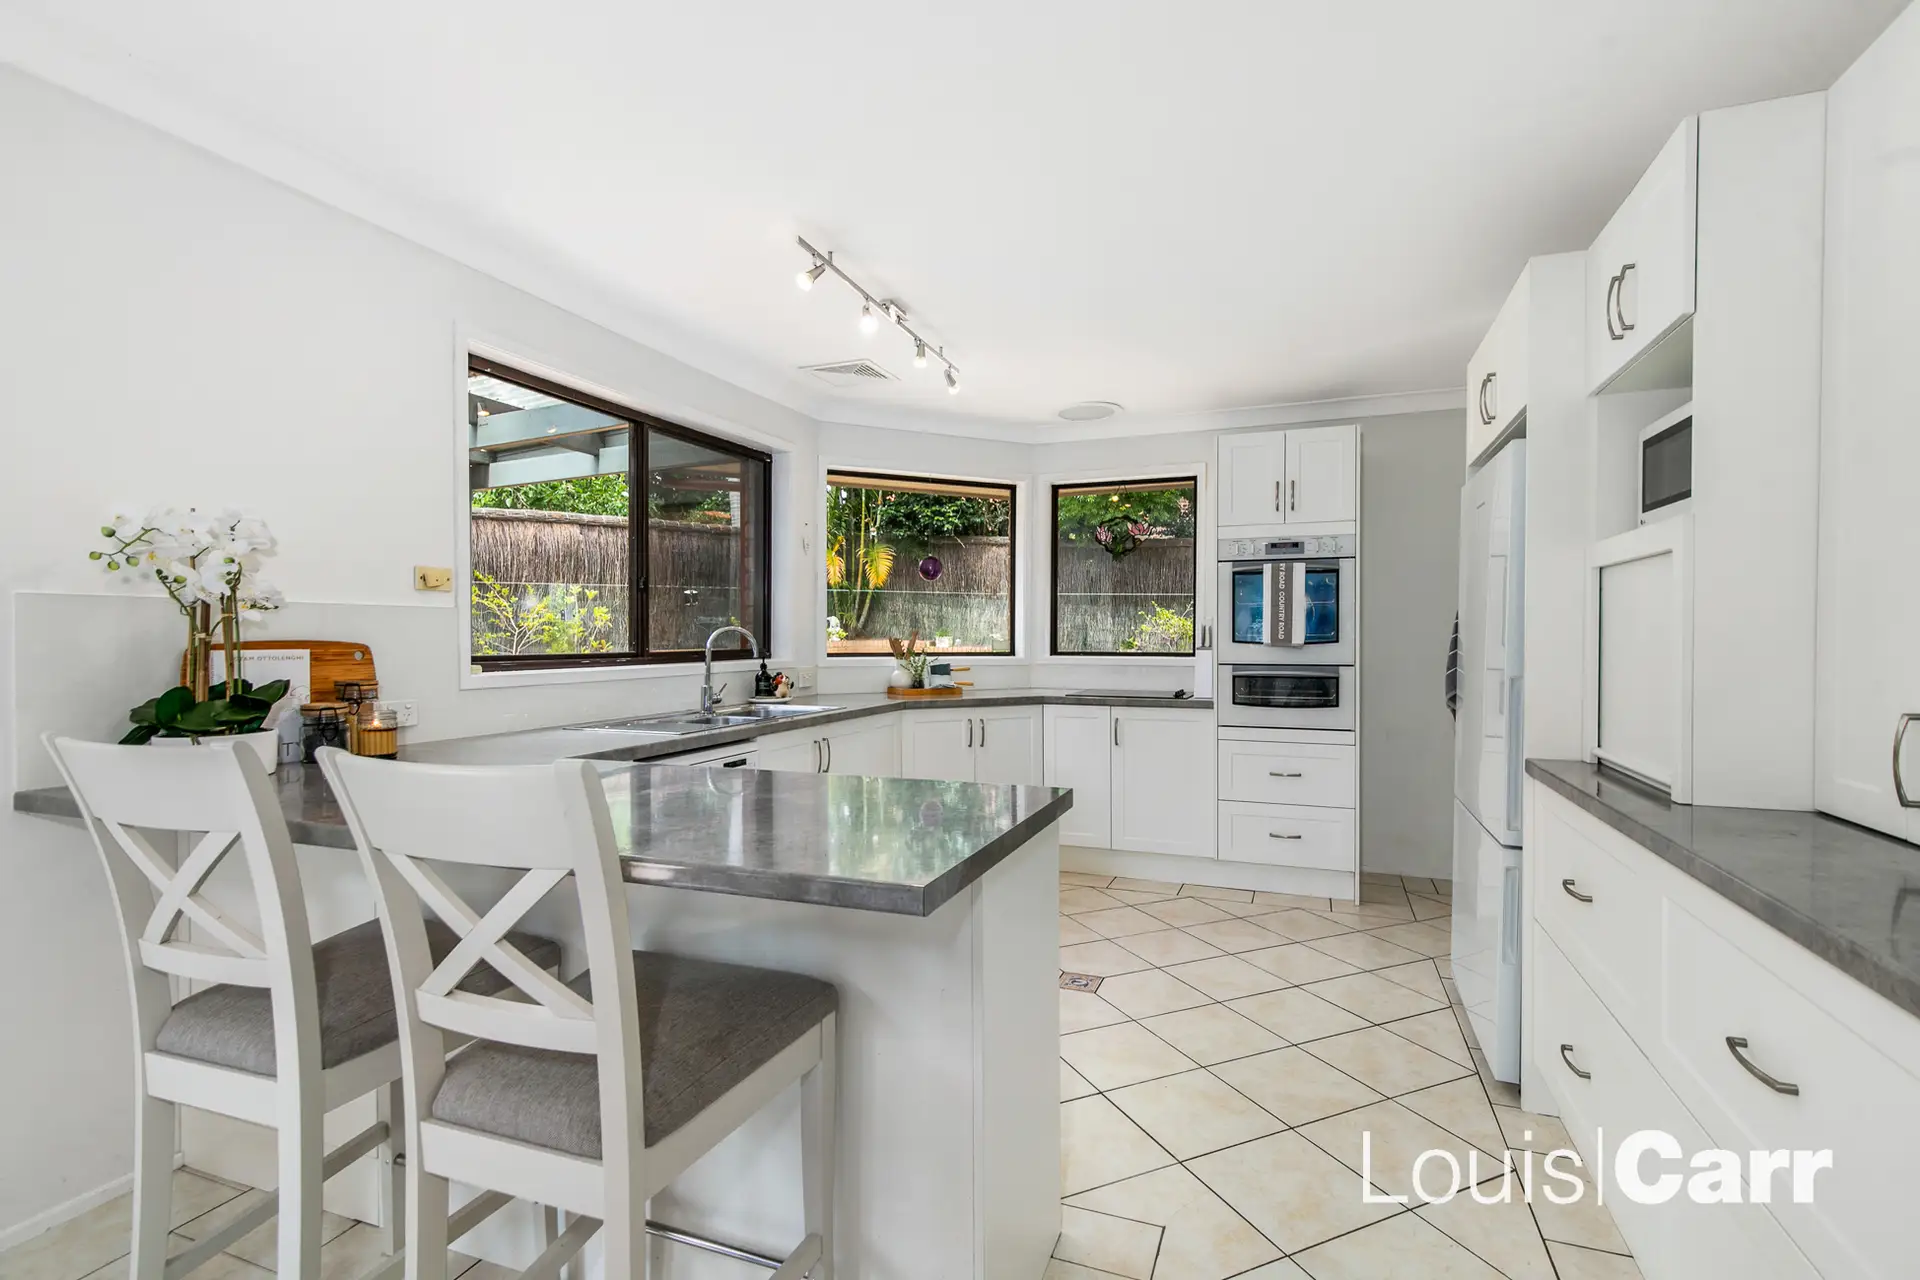 Photo #4: 4 Lorikeet Way, West Pennant Hills - Sold by Louis Carr Real Estate